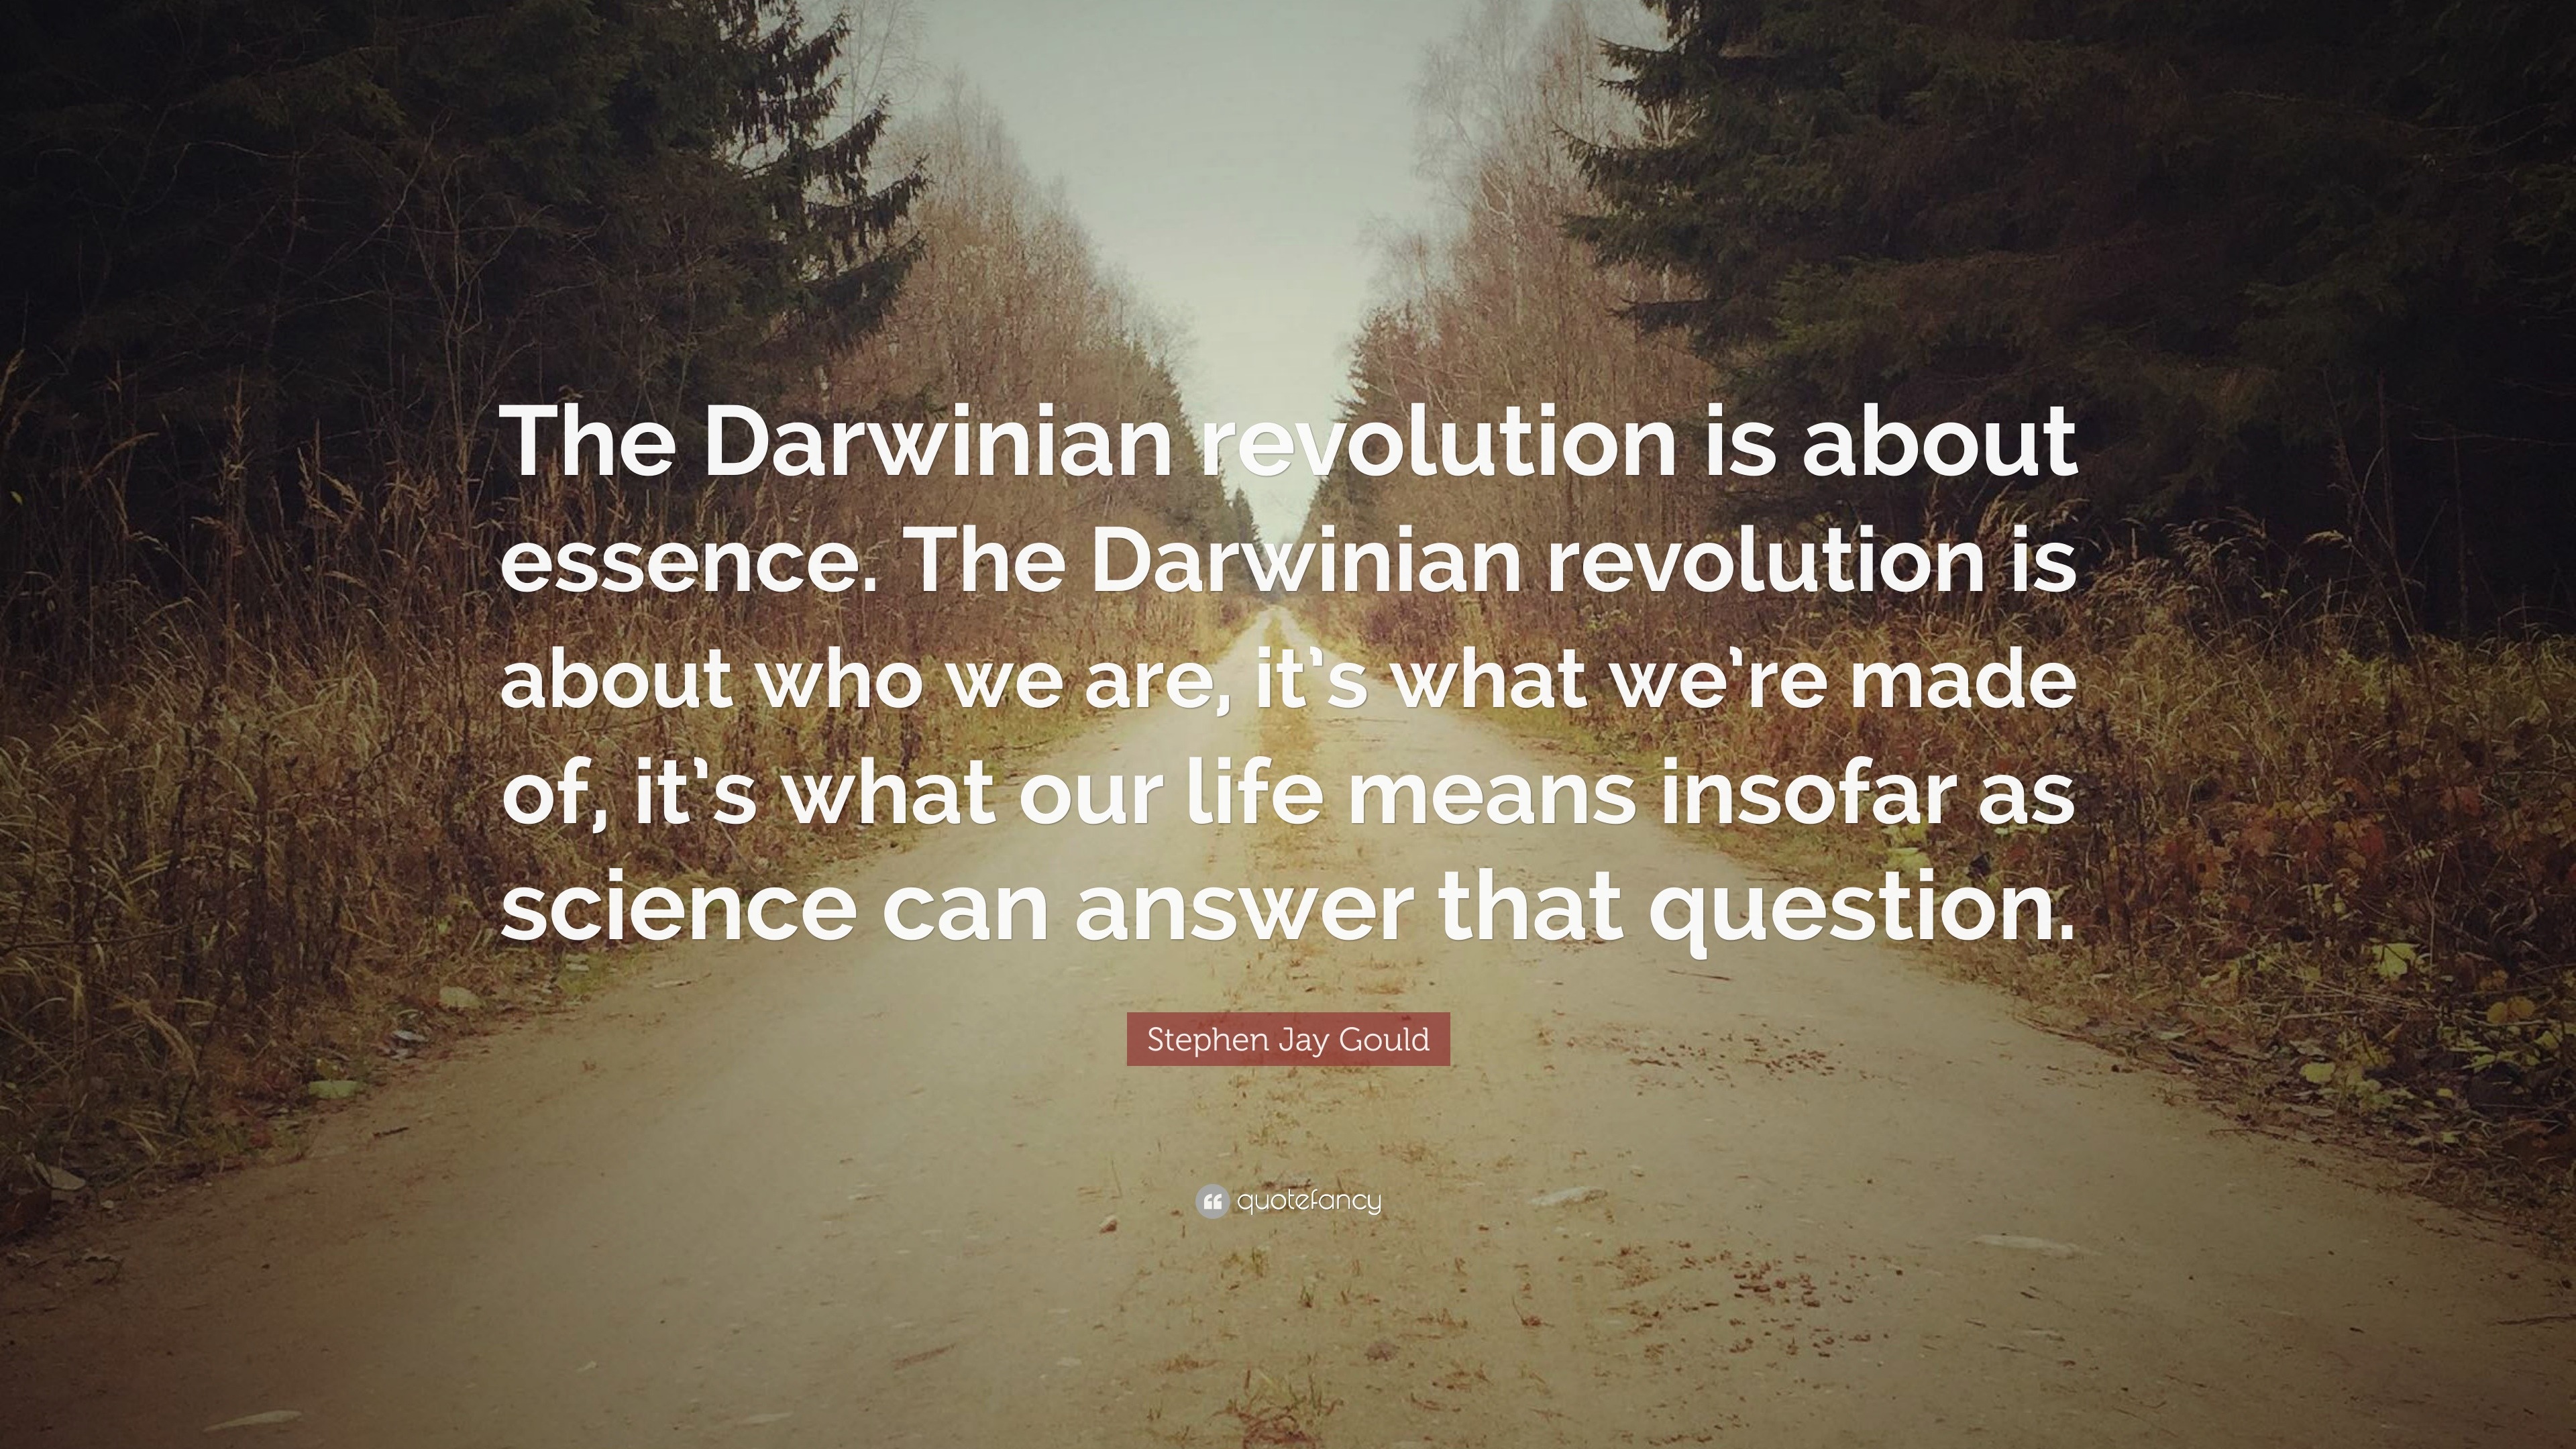 Stephen Jay Gould Quote: “The Darwinian revolution is about essence